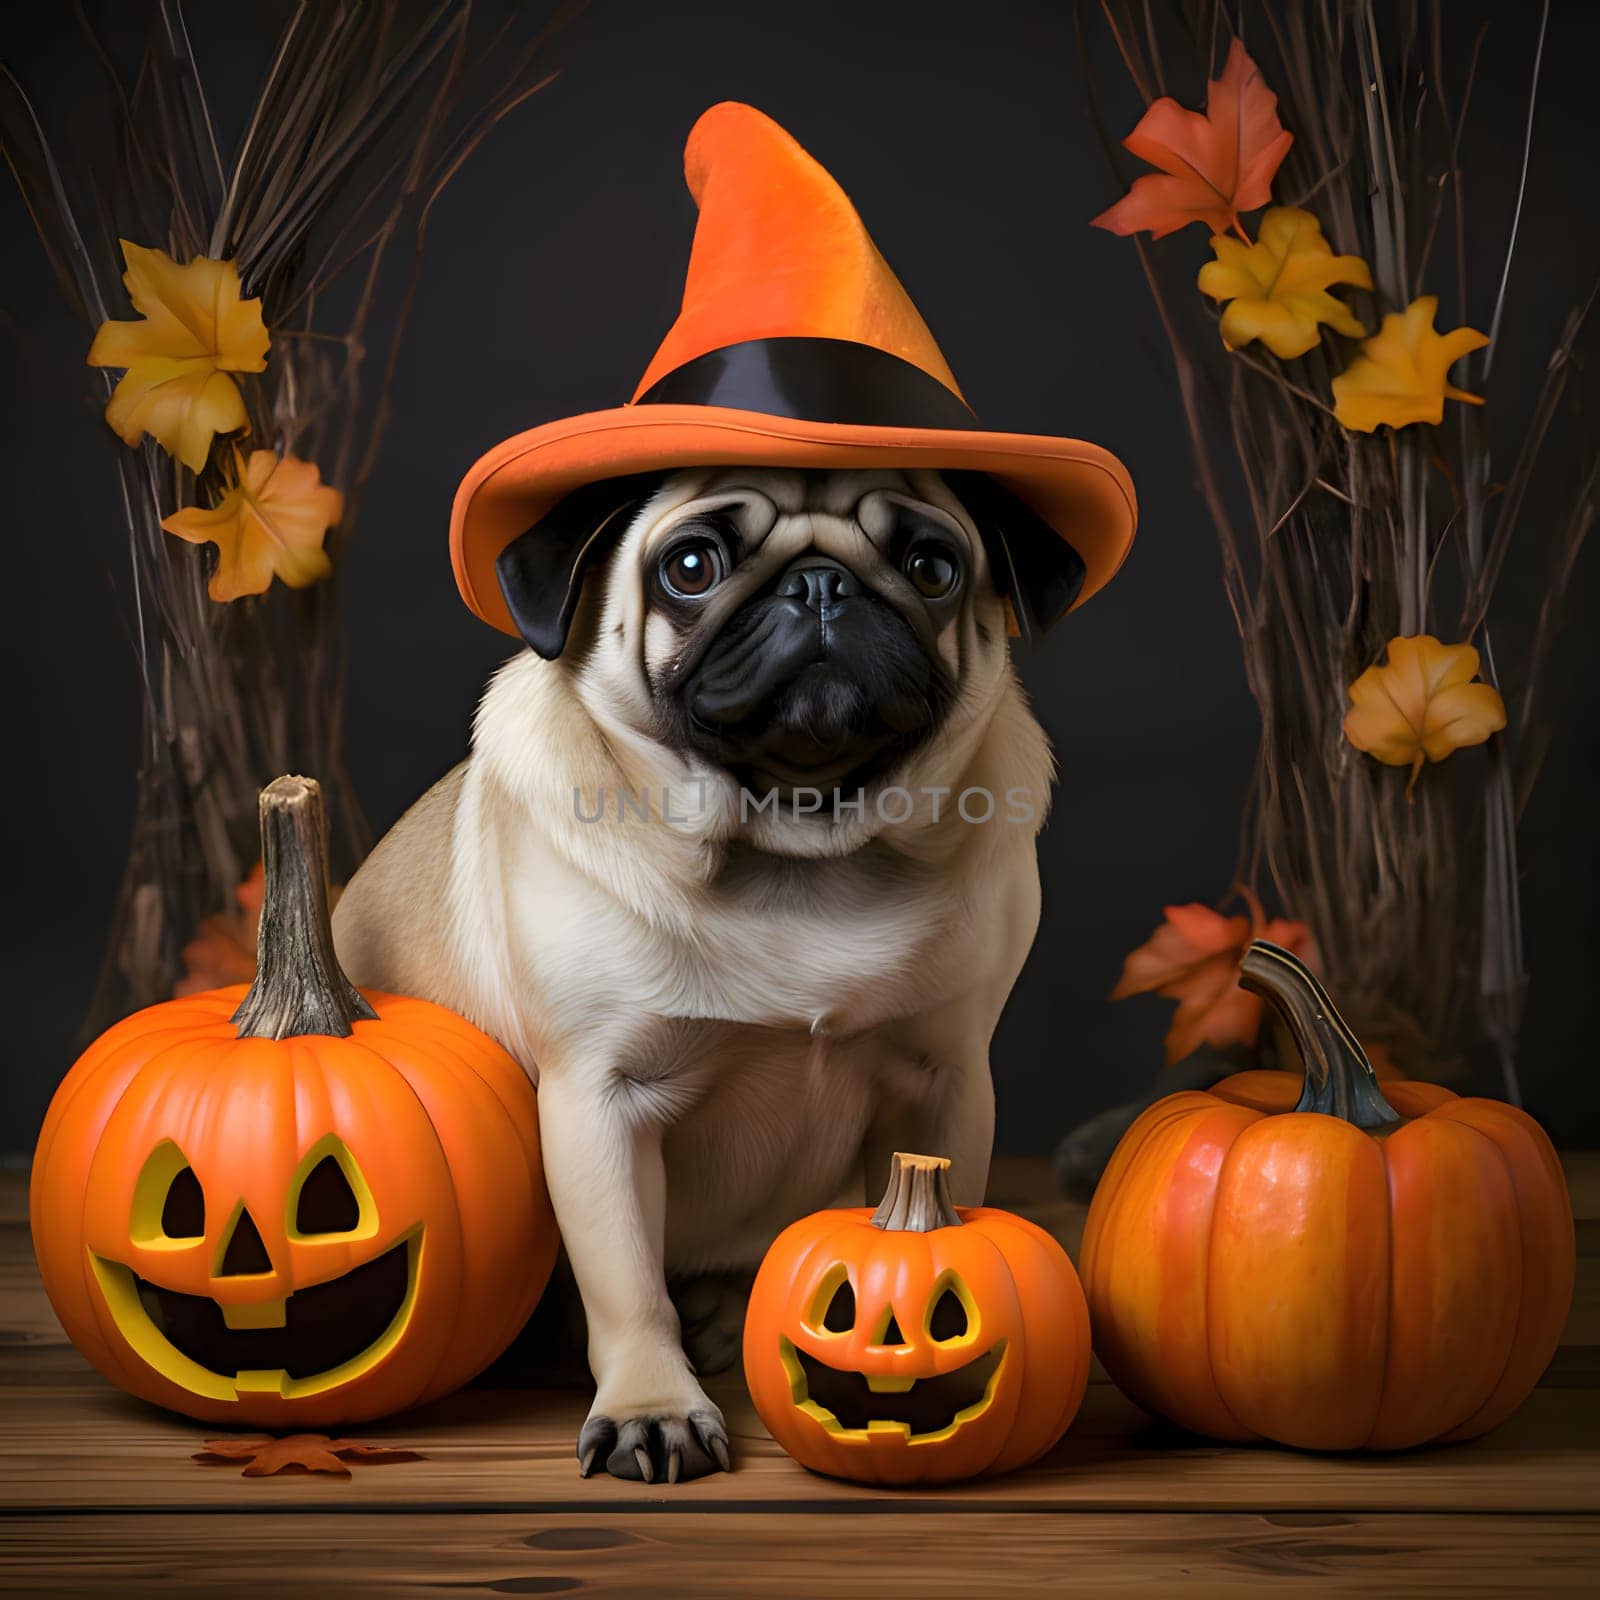 A dog with an orange hat, all around pumpkins and leaves, a Halloween image. Atmosphere of darkness and fear.